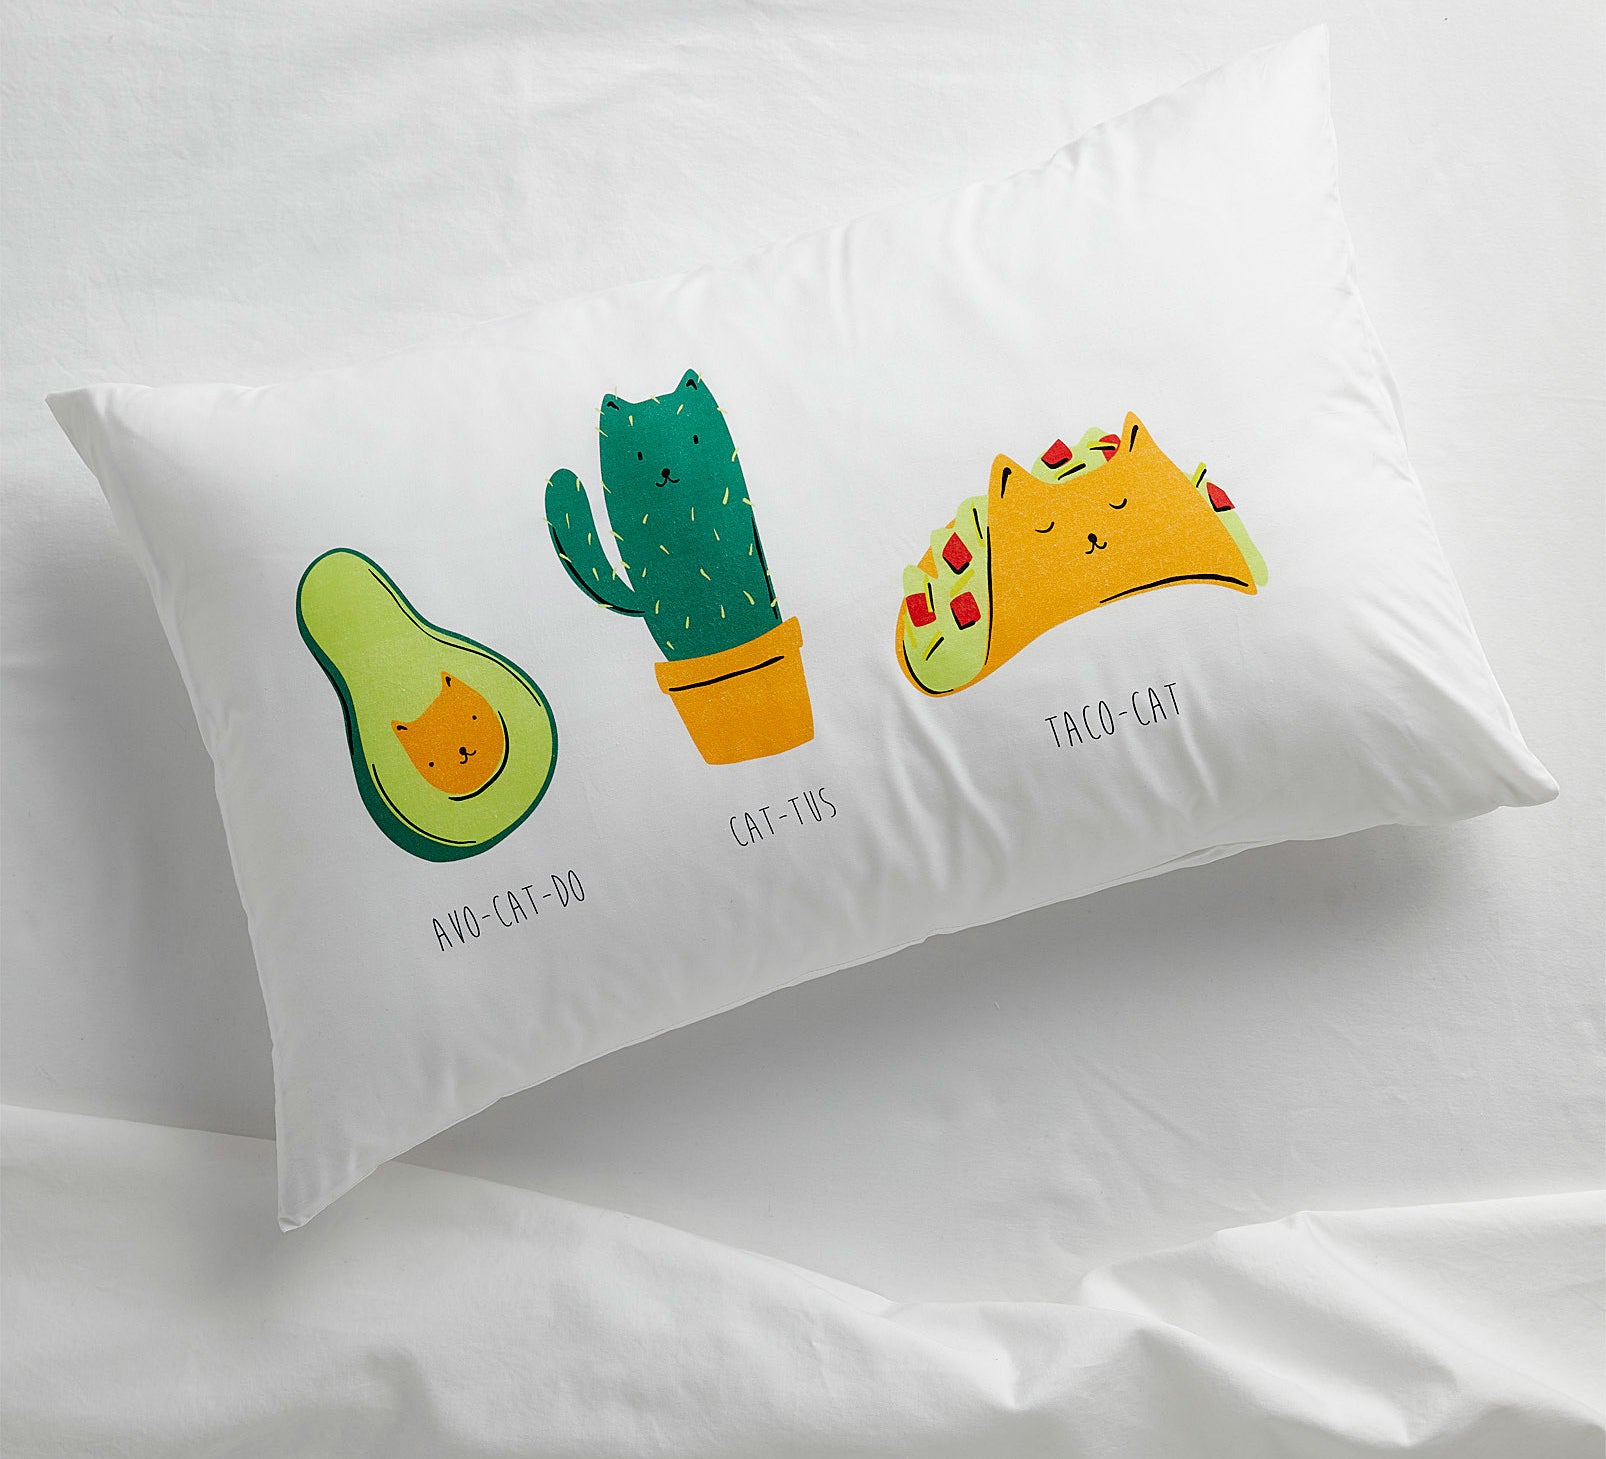 A pillowcase with illustrations of cats as a avocado, a cactus and a taco